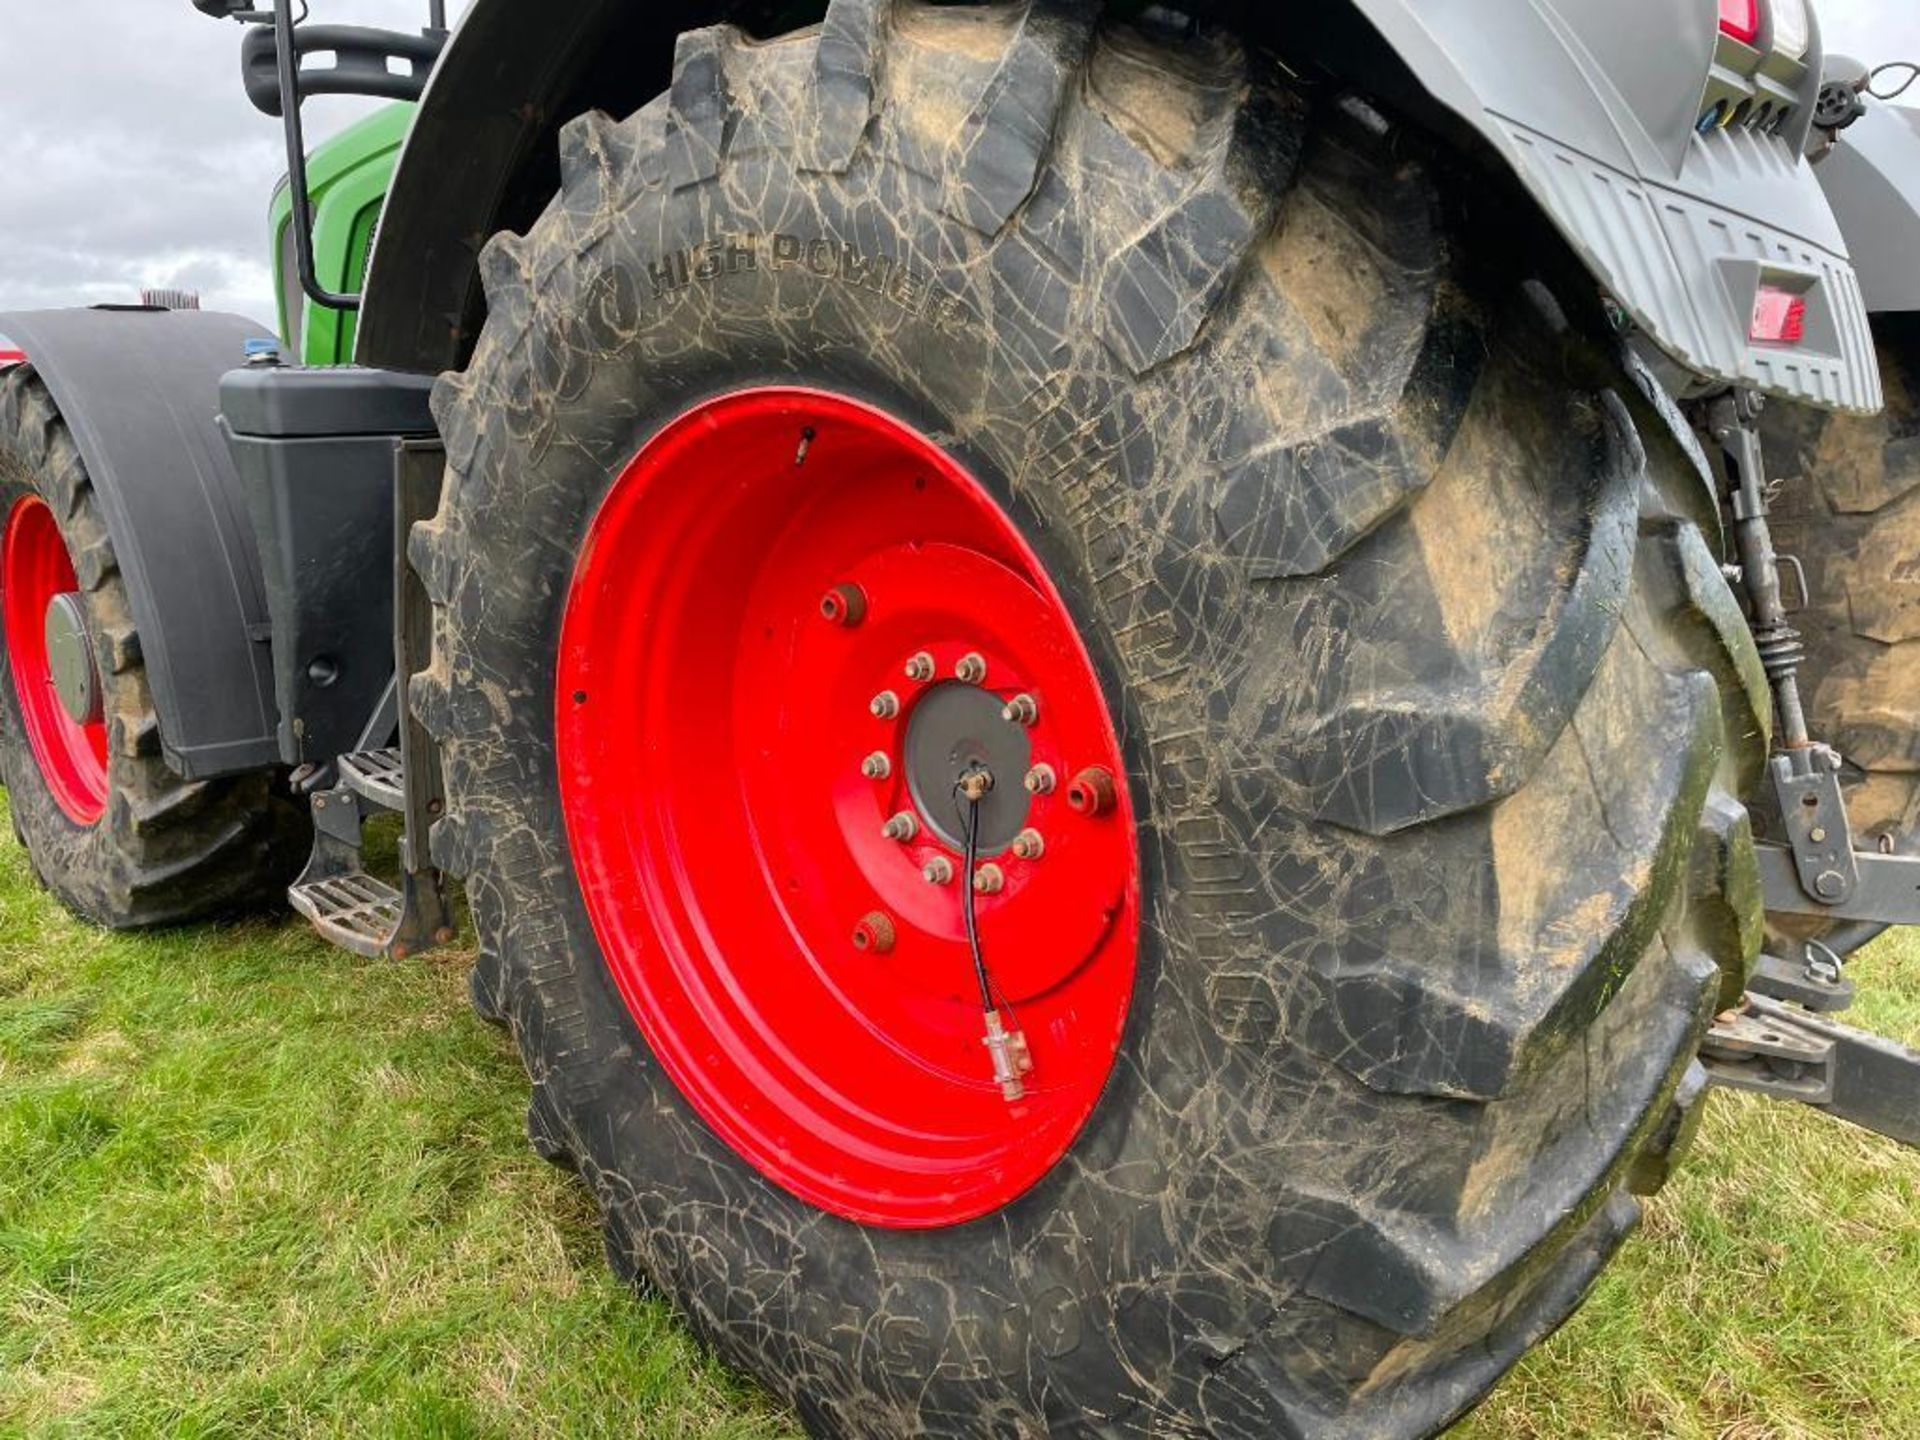 2018 Fendt 930 Vario Profi Plus 65kph 4wd tractor with front and cab suspension, front linkage and h - Image 13 of 20